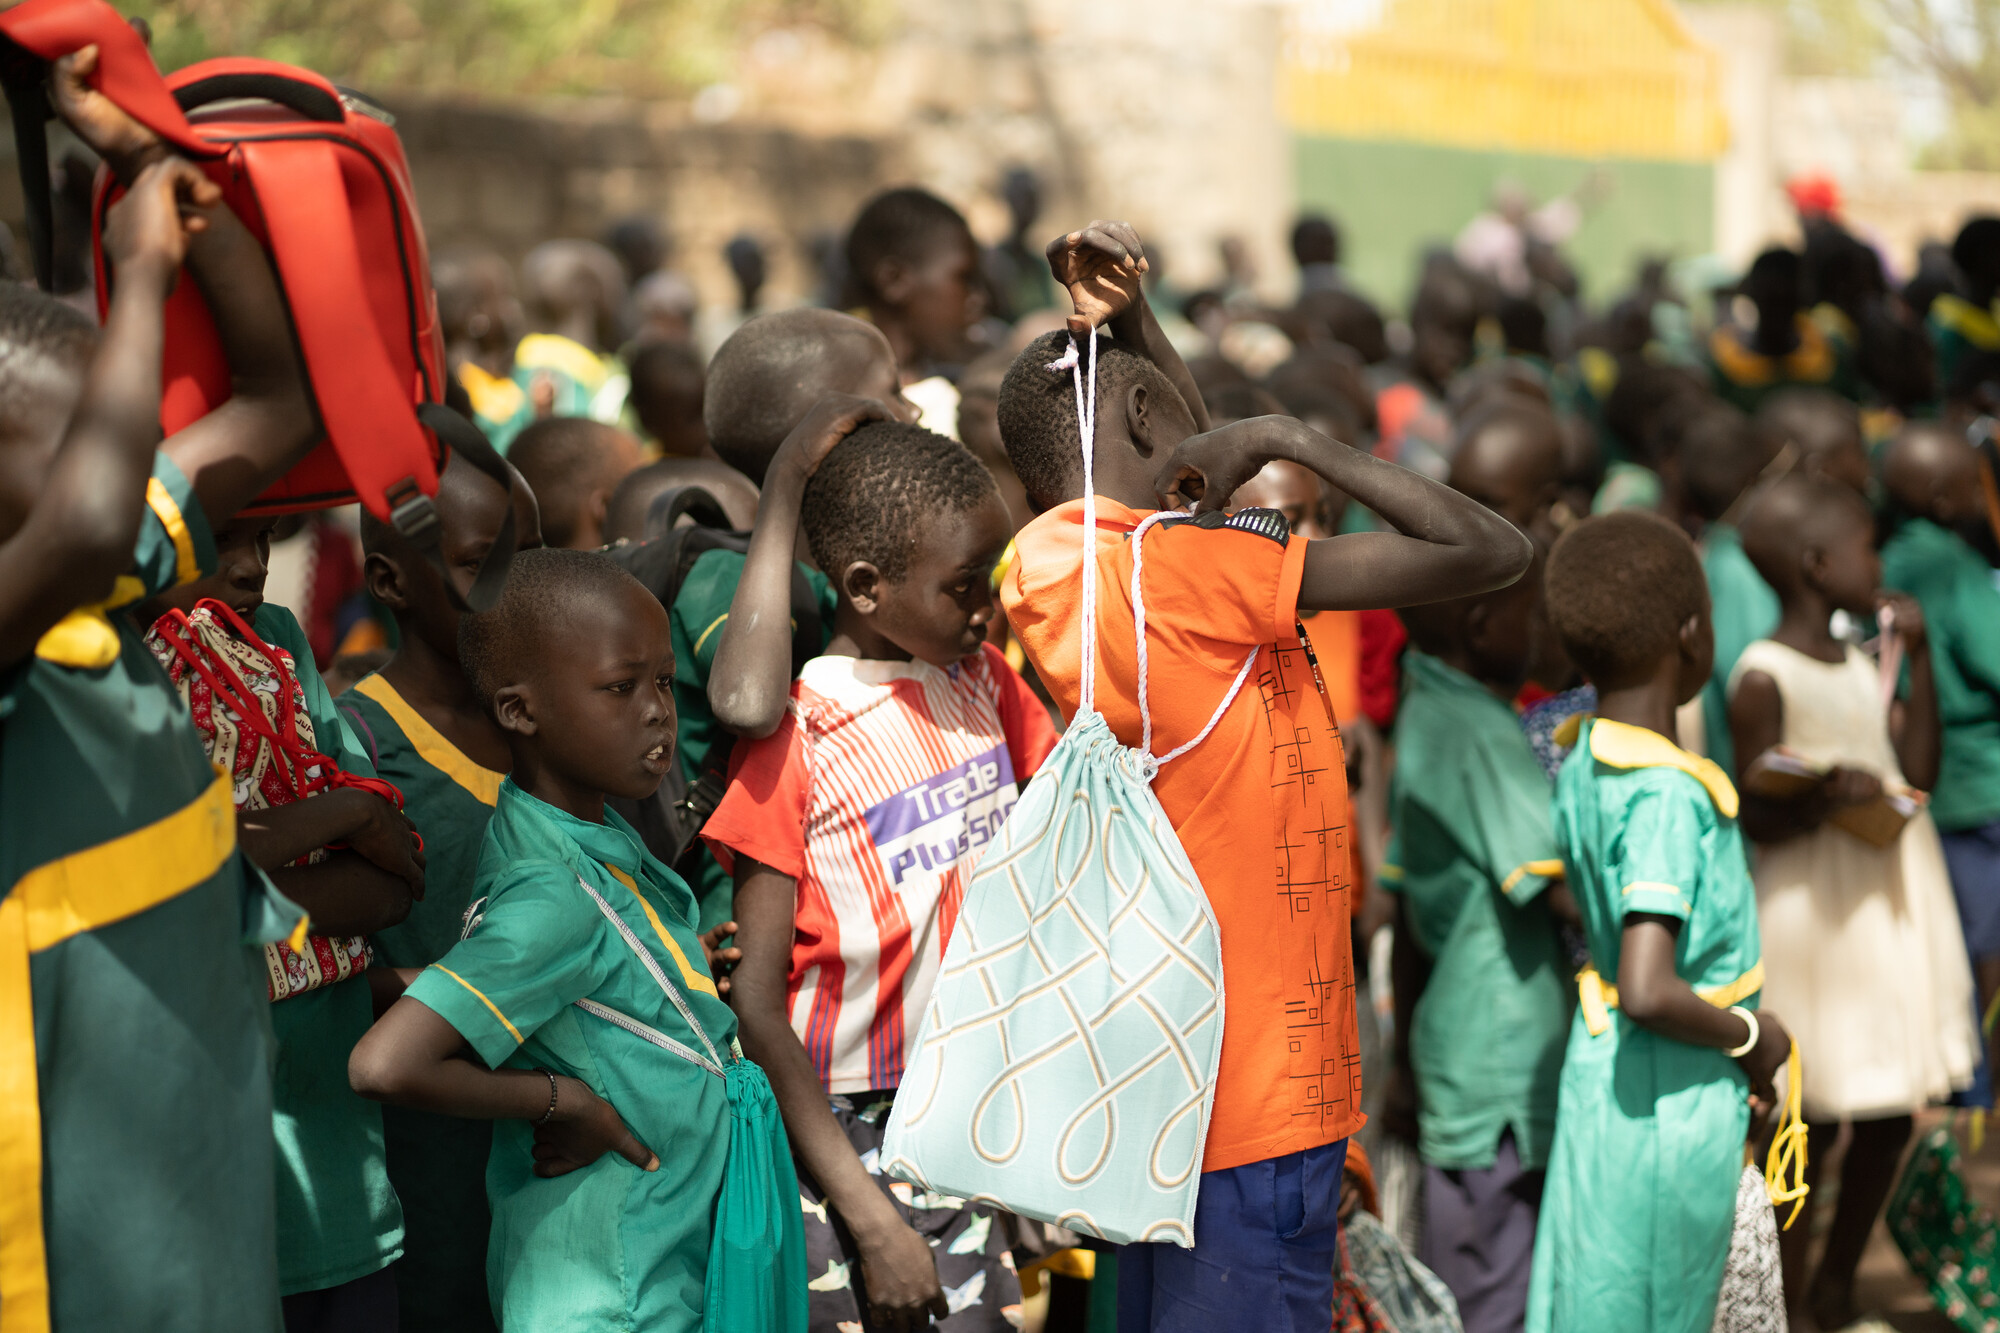 A large group of South Sudanese students. A child in the center in an orange shirt has a cloth bag thrown over his shoulders